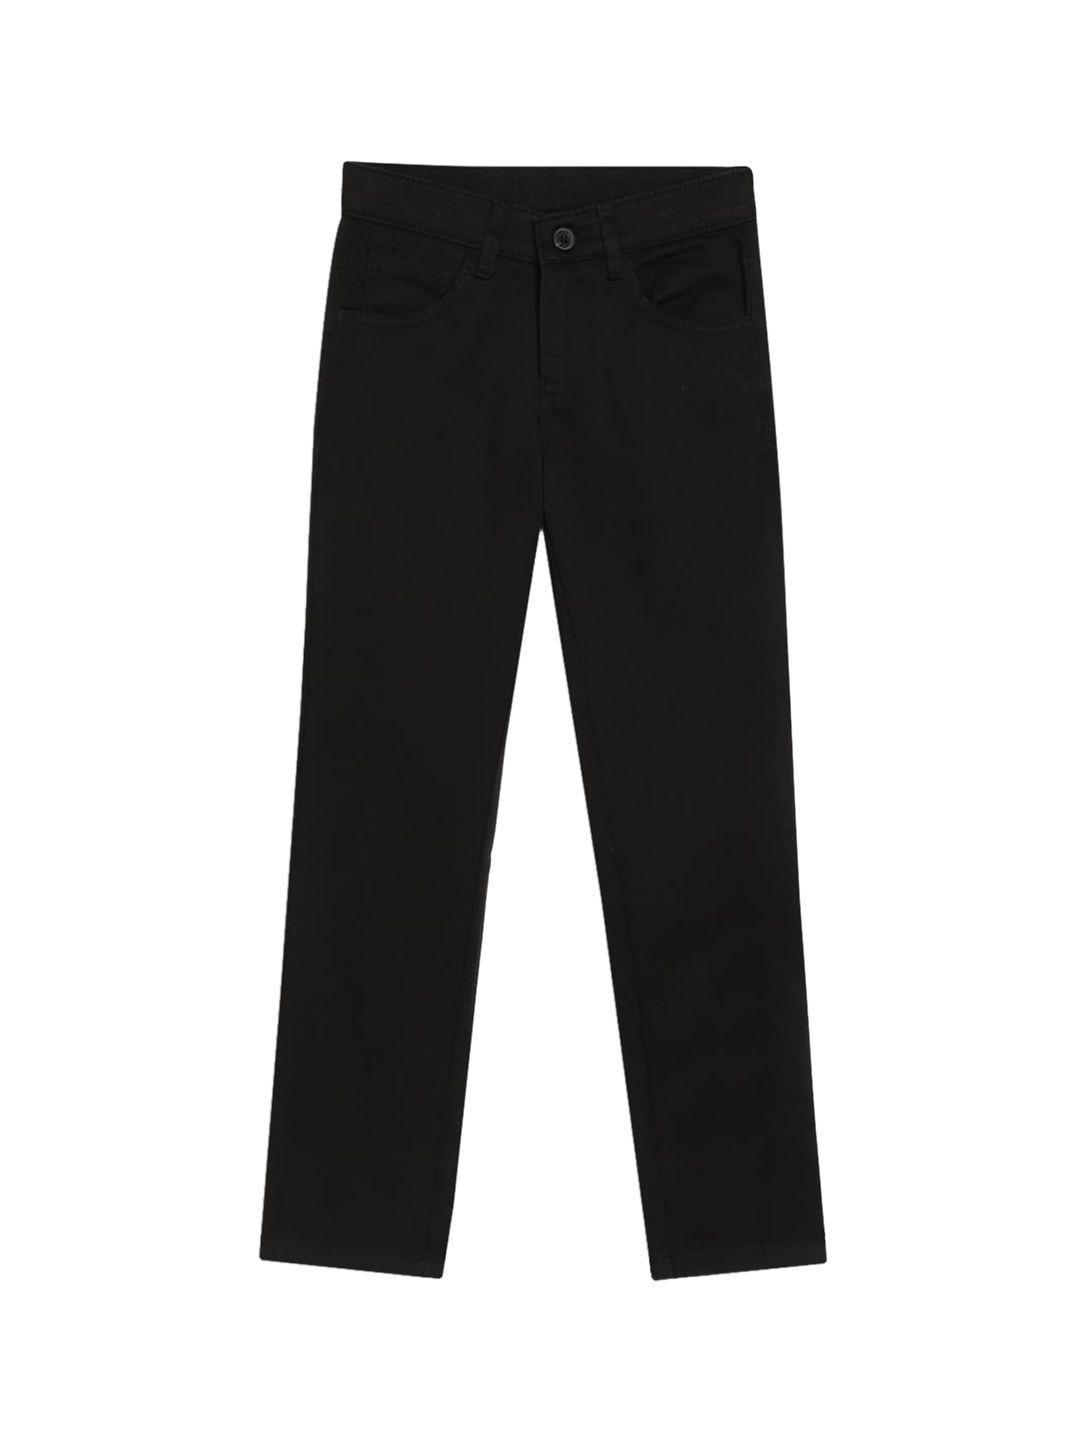 cantabil-boys-black-chinos-trousers